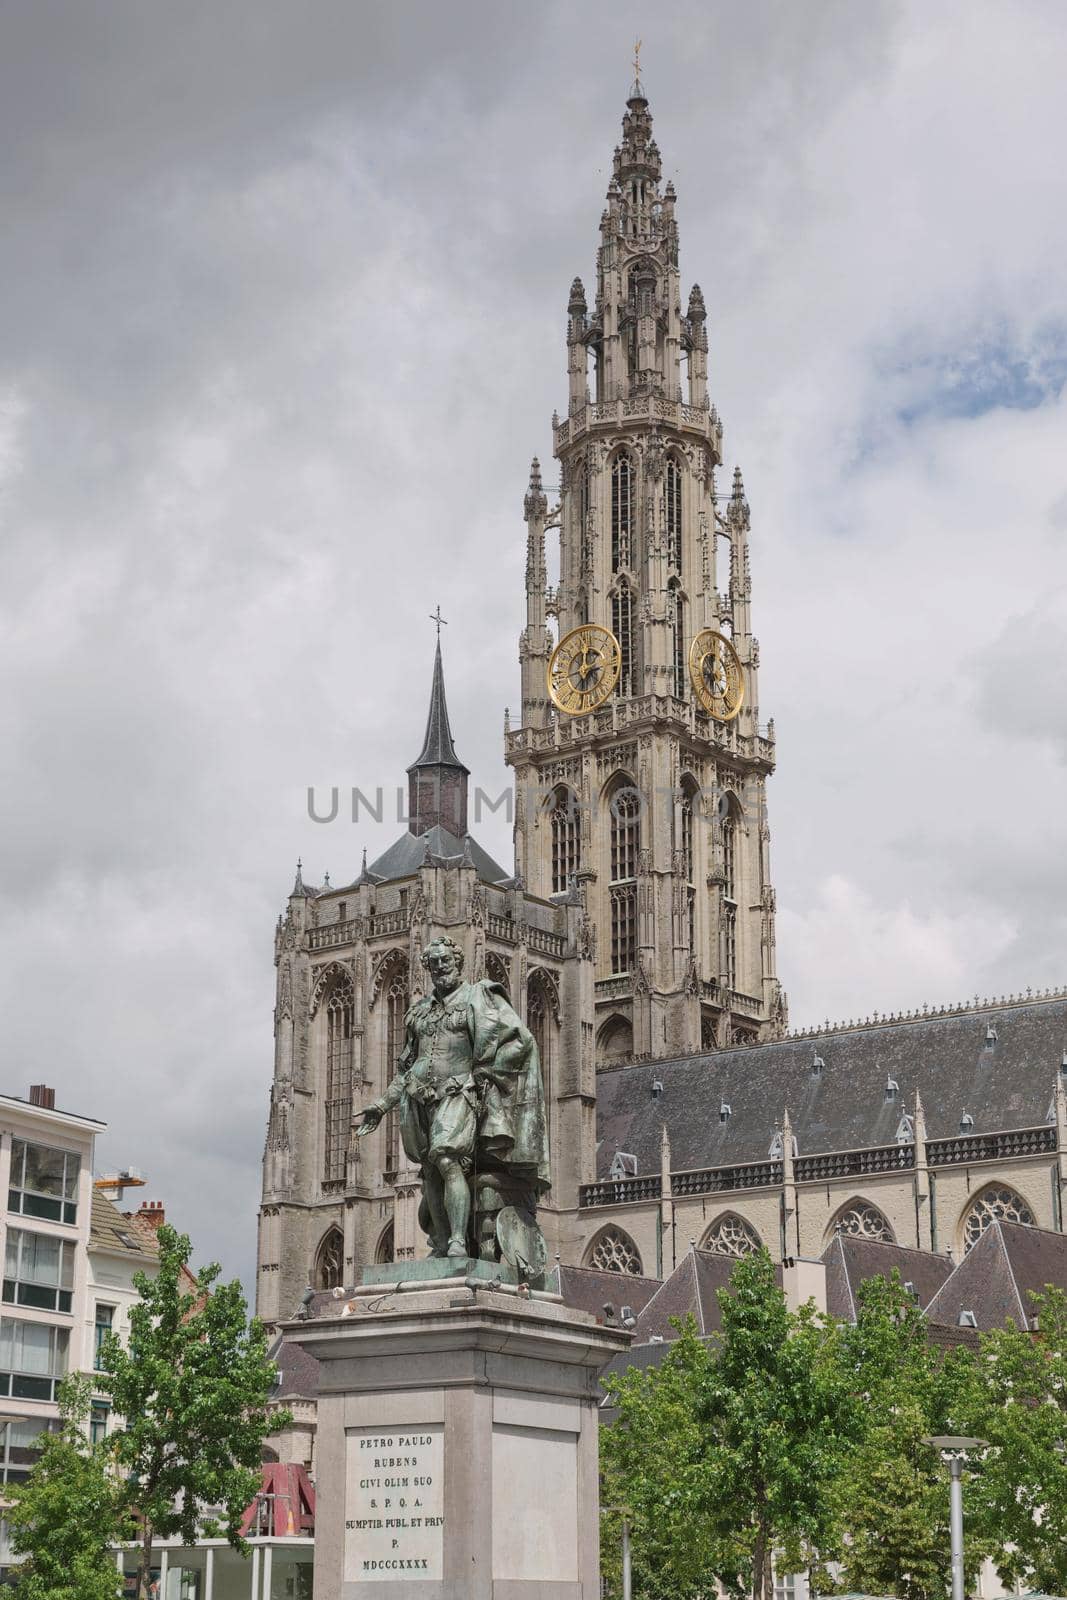 View of a cathedral of our lady in Antwerp Belgium.